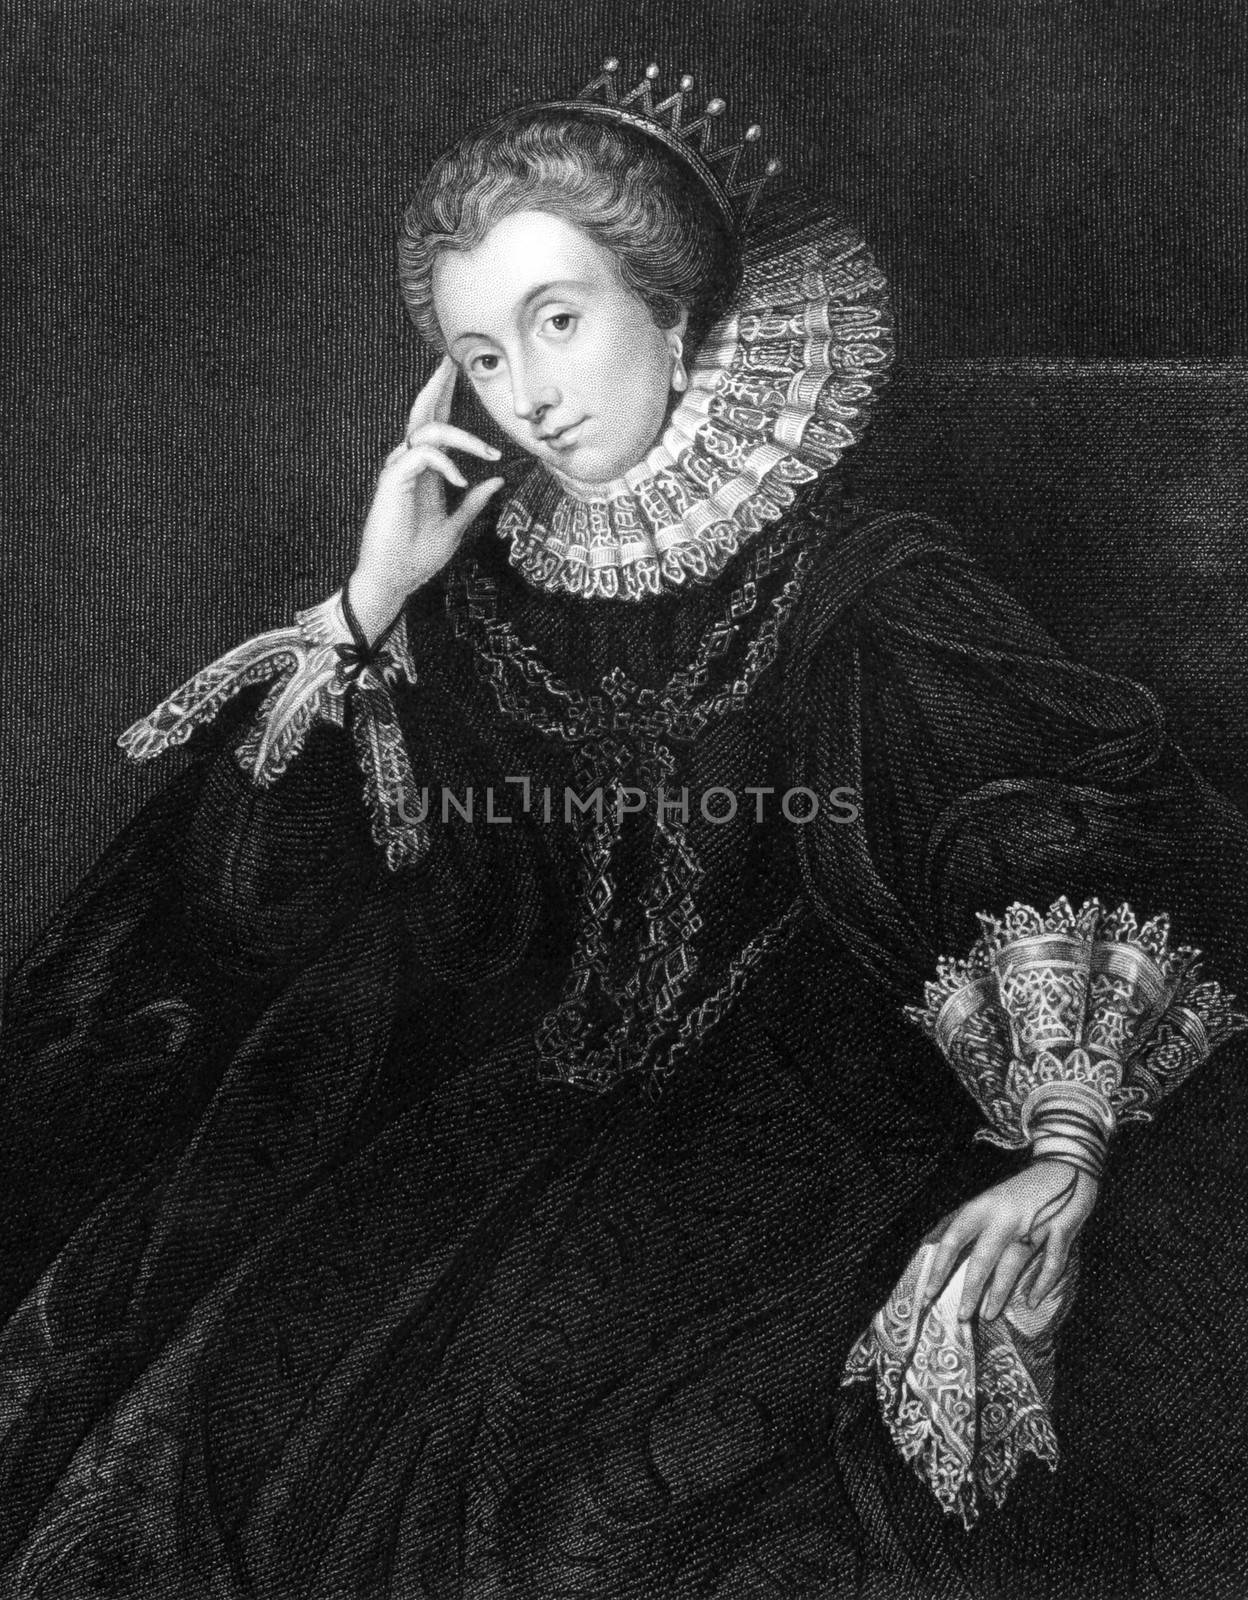 Lucy Russell, Countess of Bedford (1580-1627) on engraving from 1831. Major aristocratic patron of the arts and literature. Engraved by H.T.Ryall and published in 
''Portraits of Illustrious Personages of Great Britain'',UK,1831.
